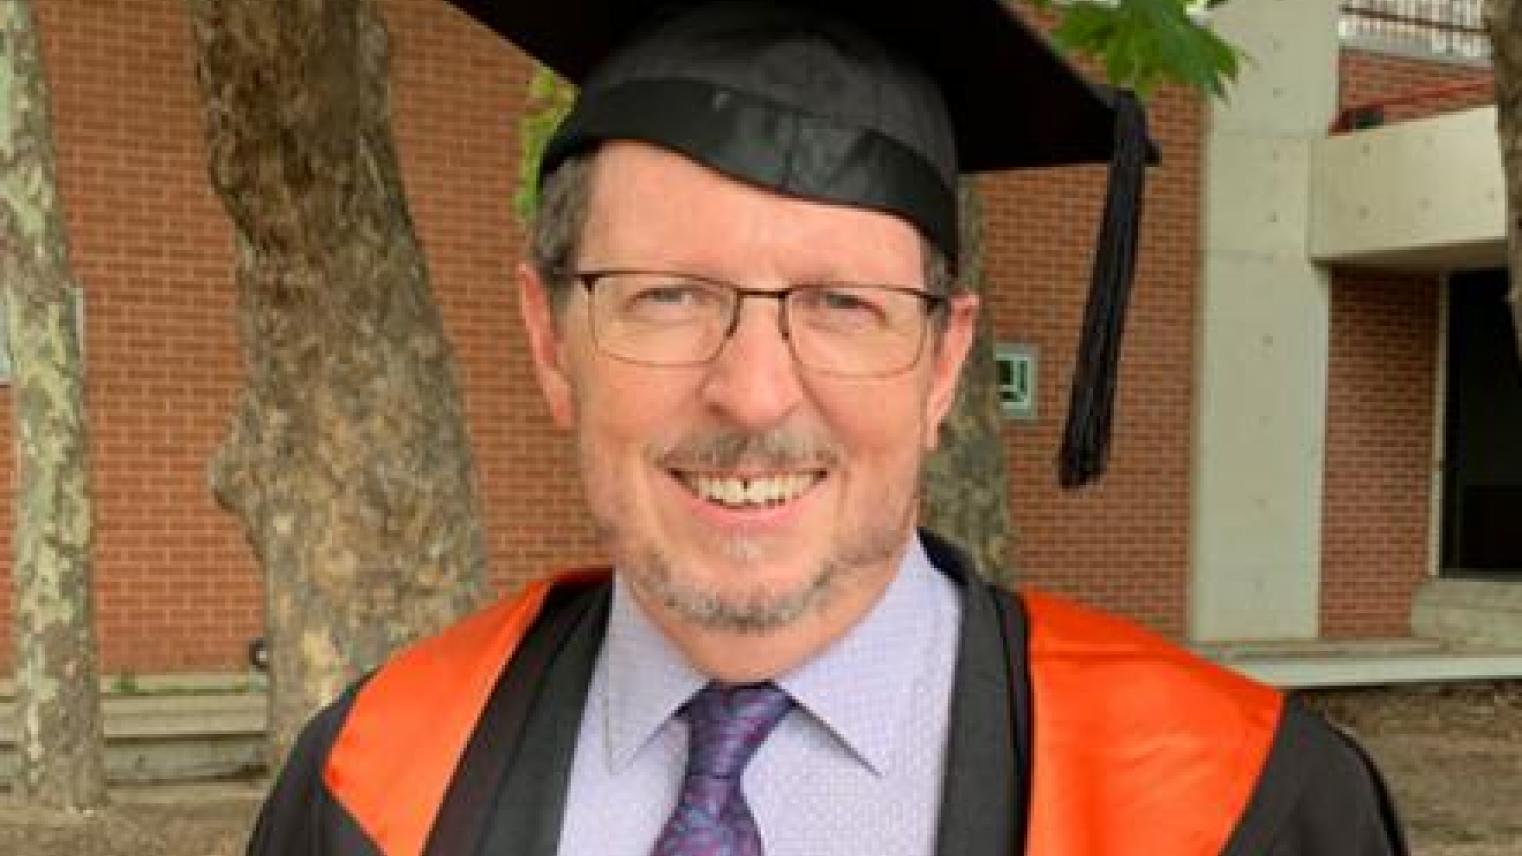 Michael Stone after December 2019 Conferring of Awards Ceremony. Image by Michael Stone